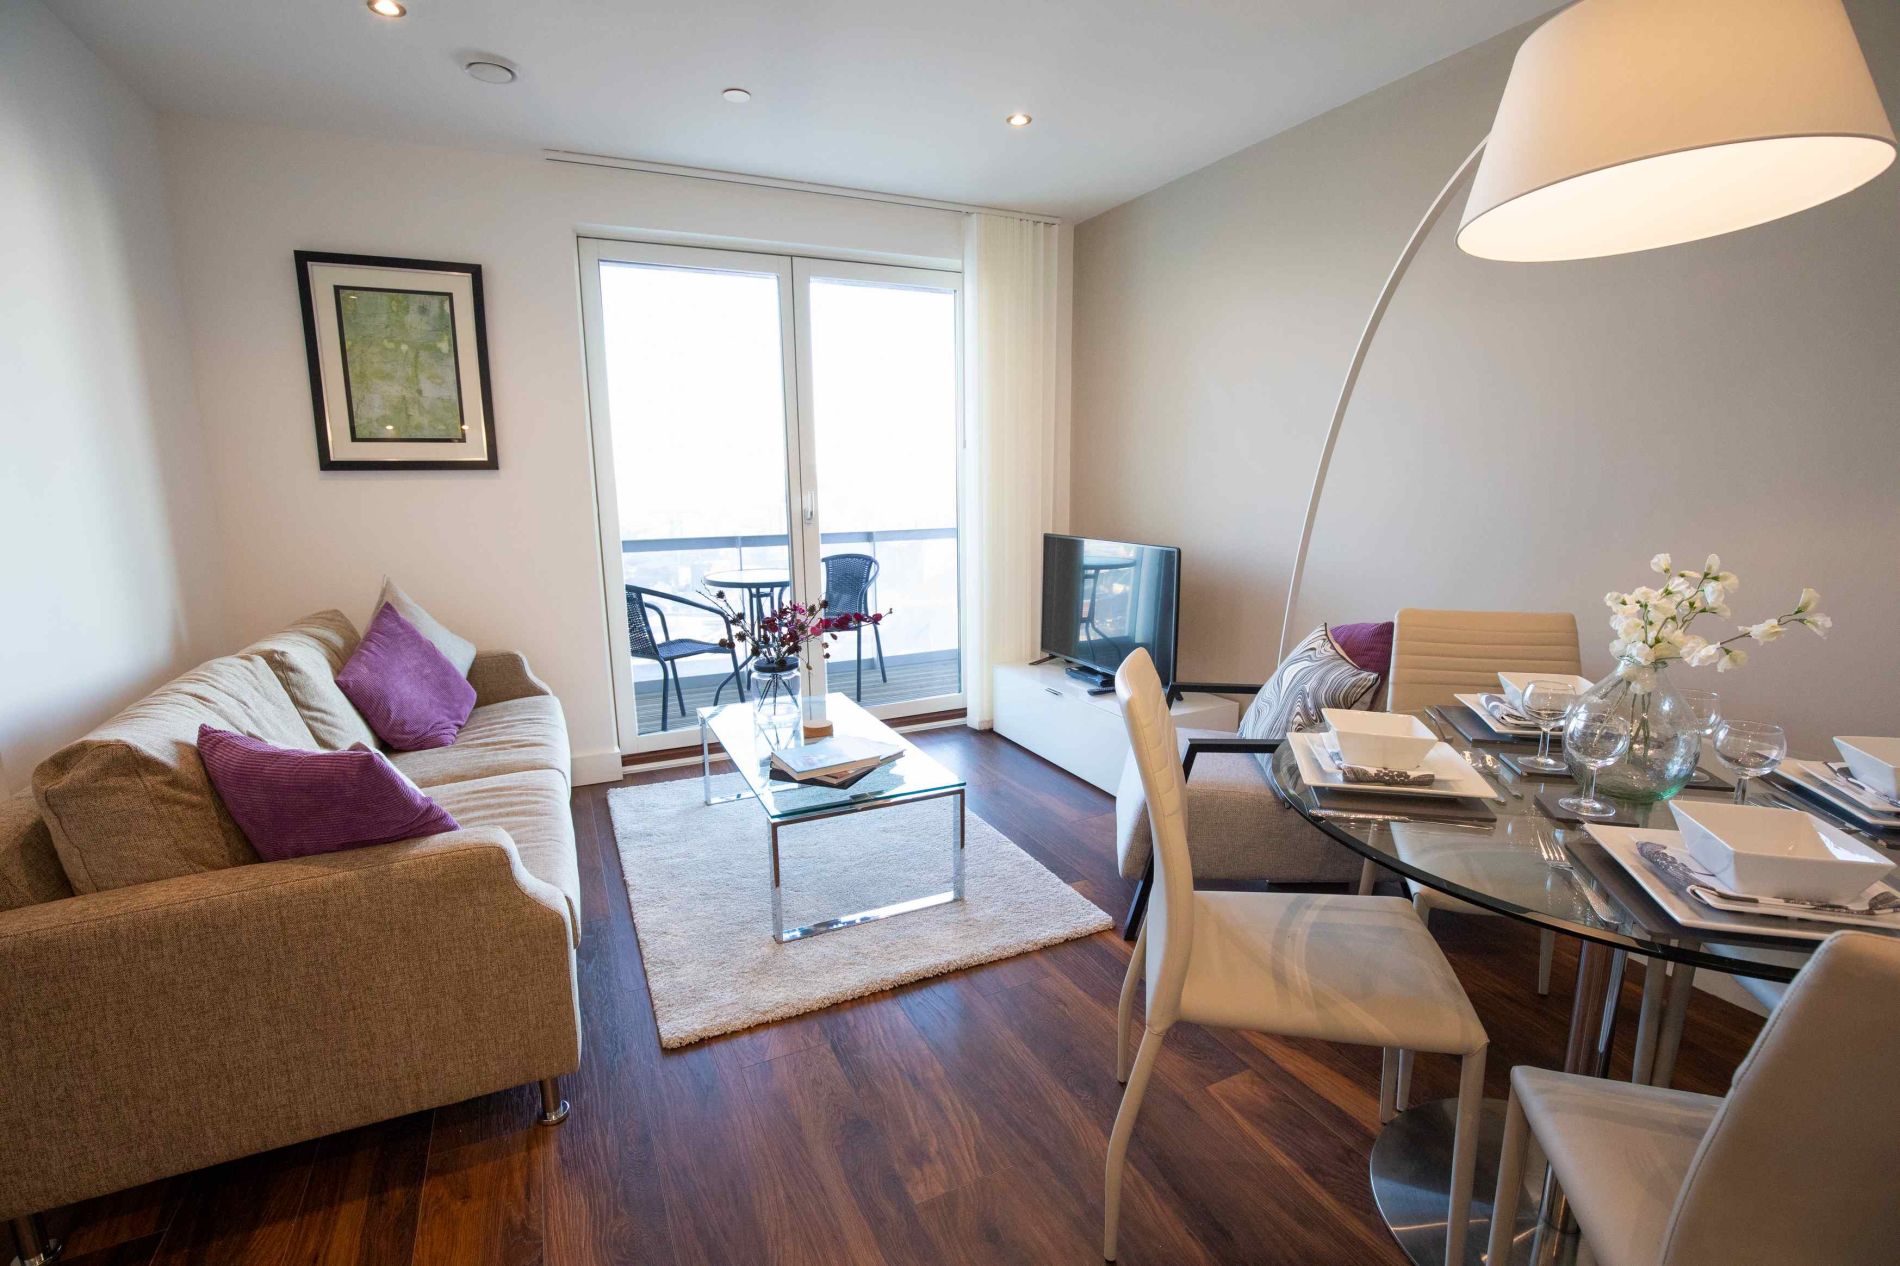 Serviced accommodation in Manchester that allows pets 3